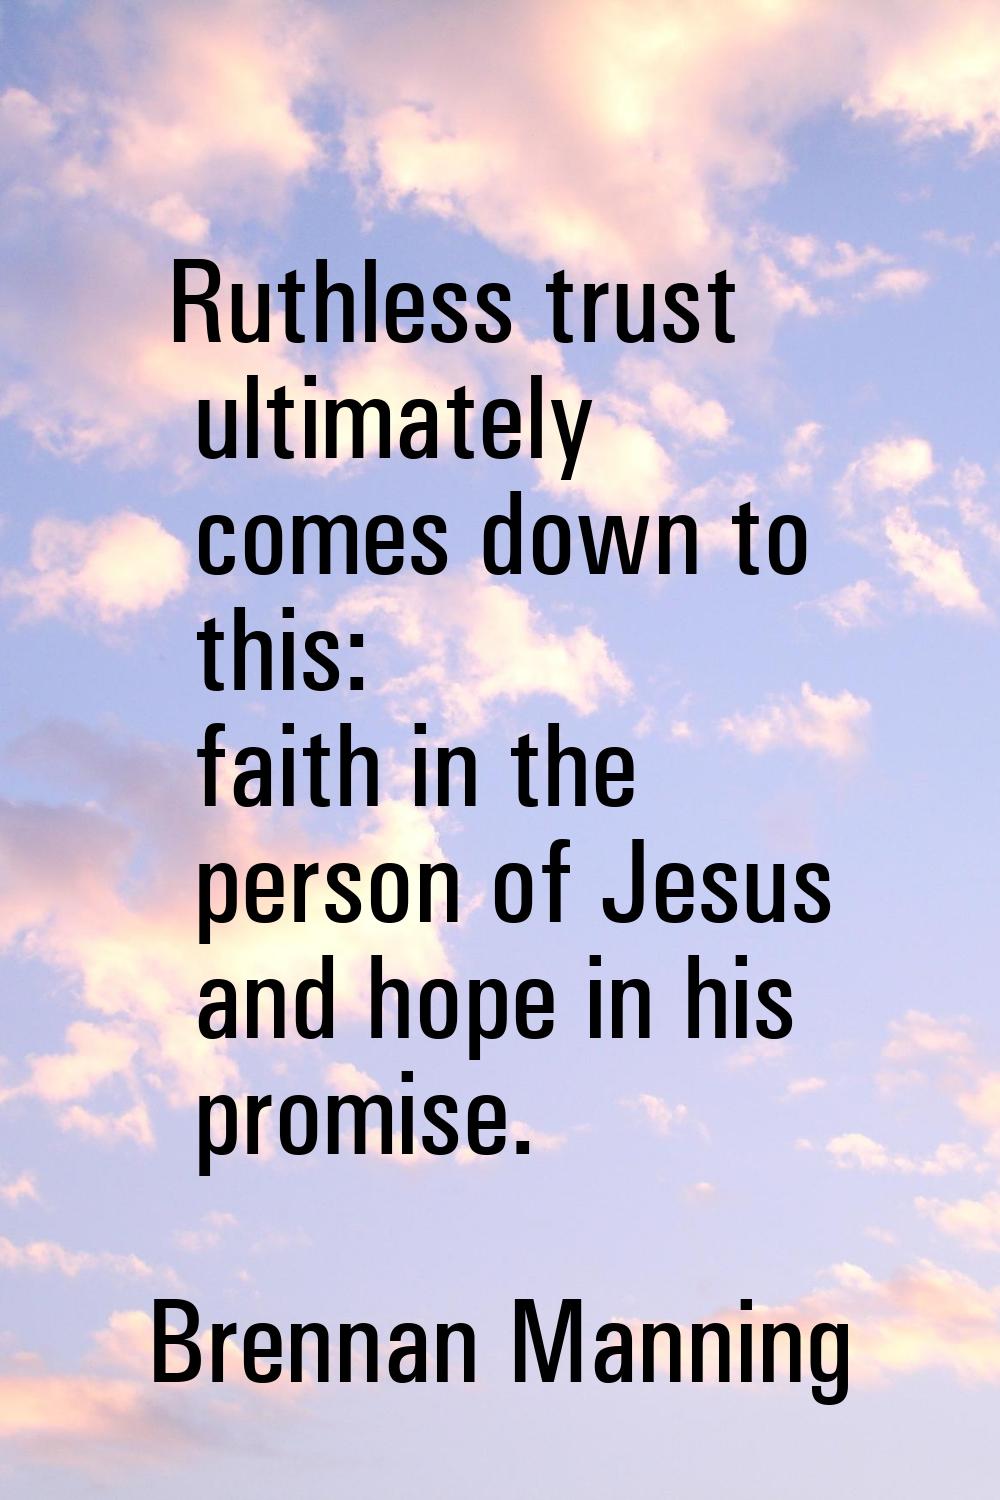 Ruthless trust ultimately comes down to this: faith in the person of Jesus and hope in his promise.